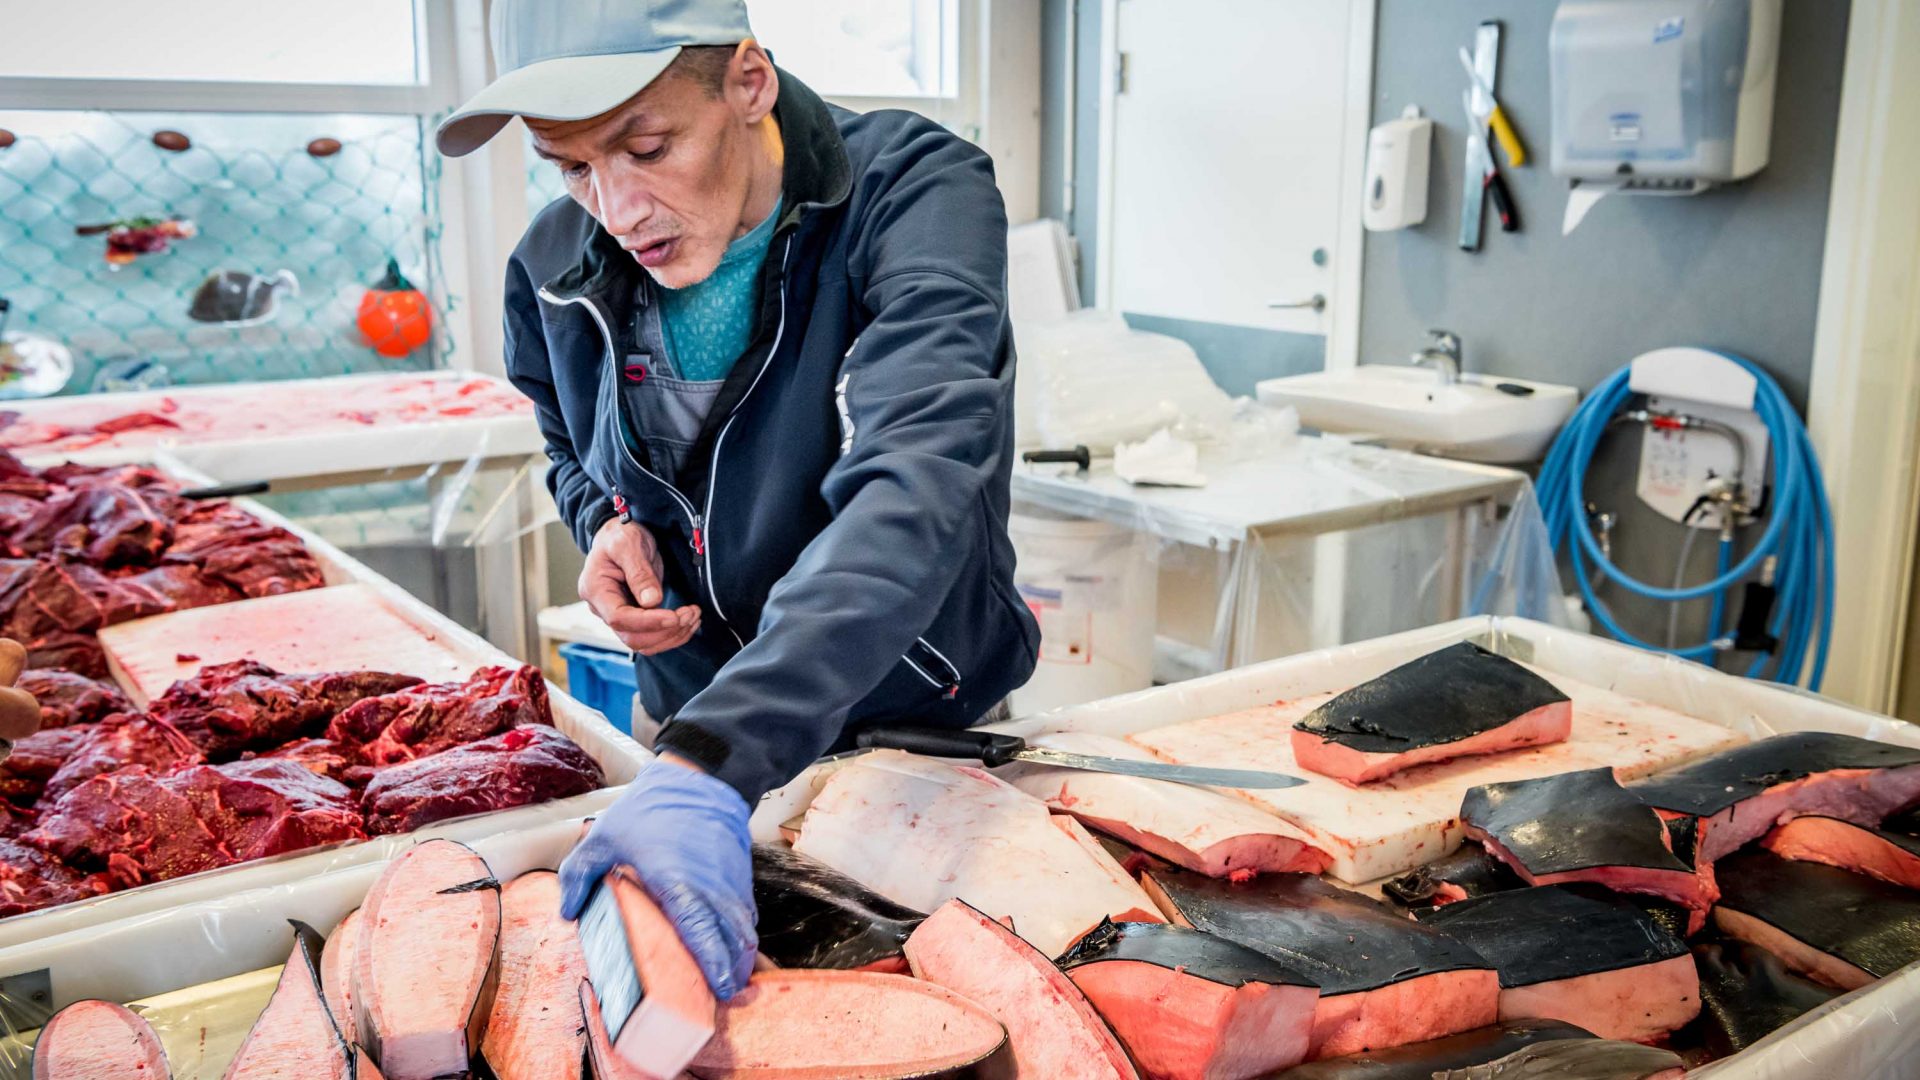 A fishmonger prepares whale blubber for sale at a market in Greenland.